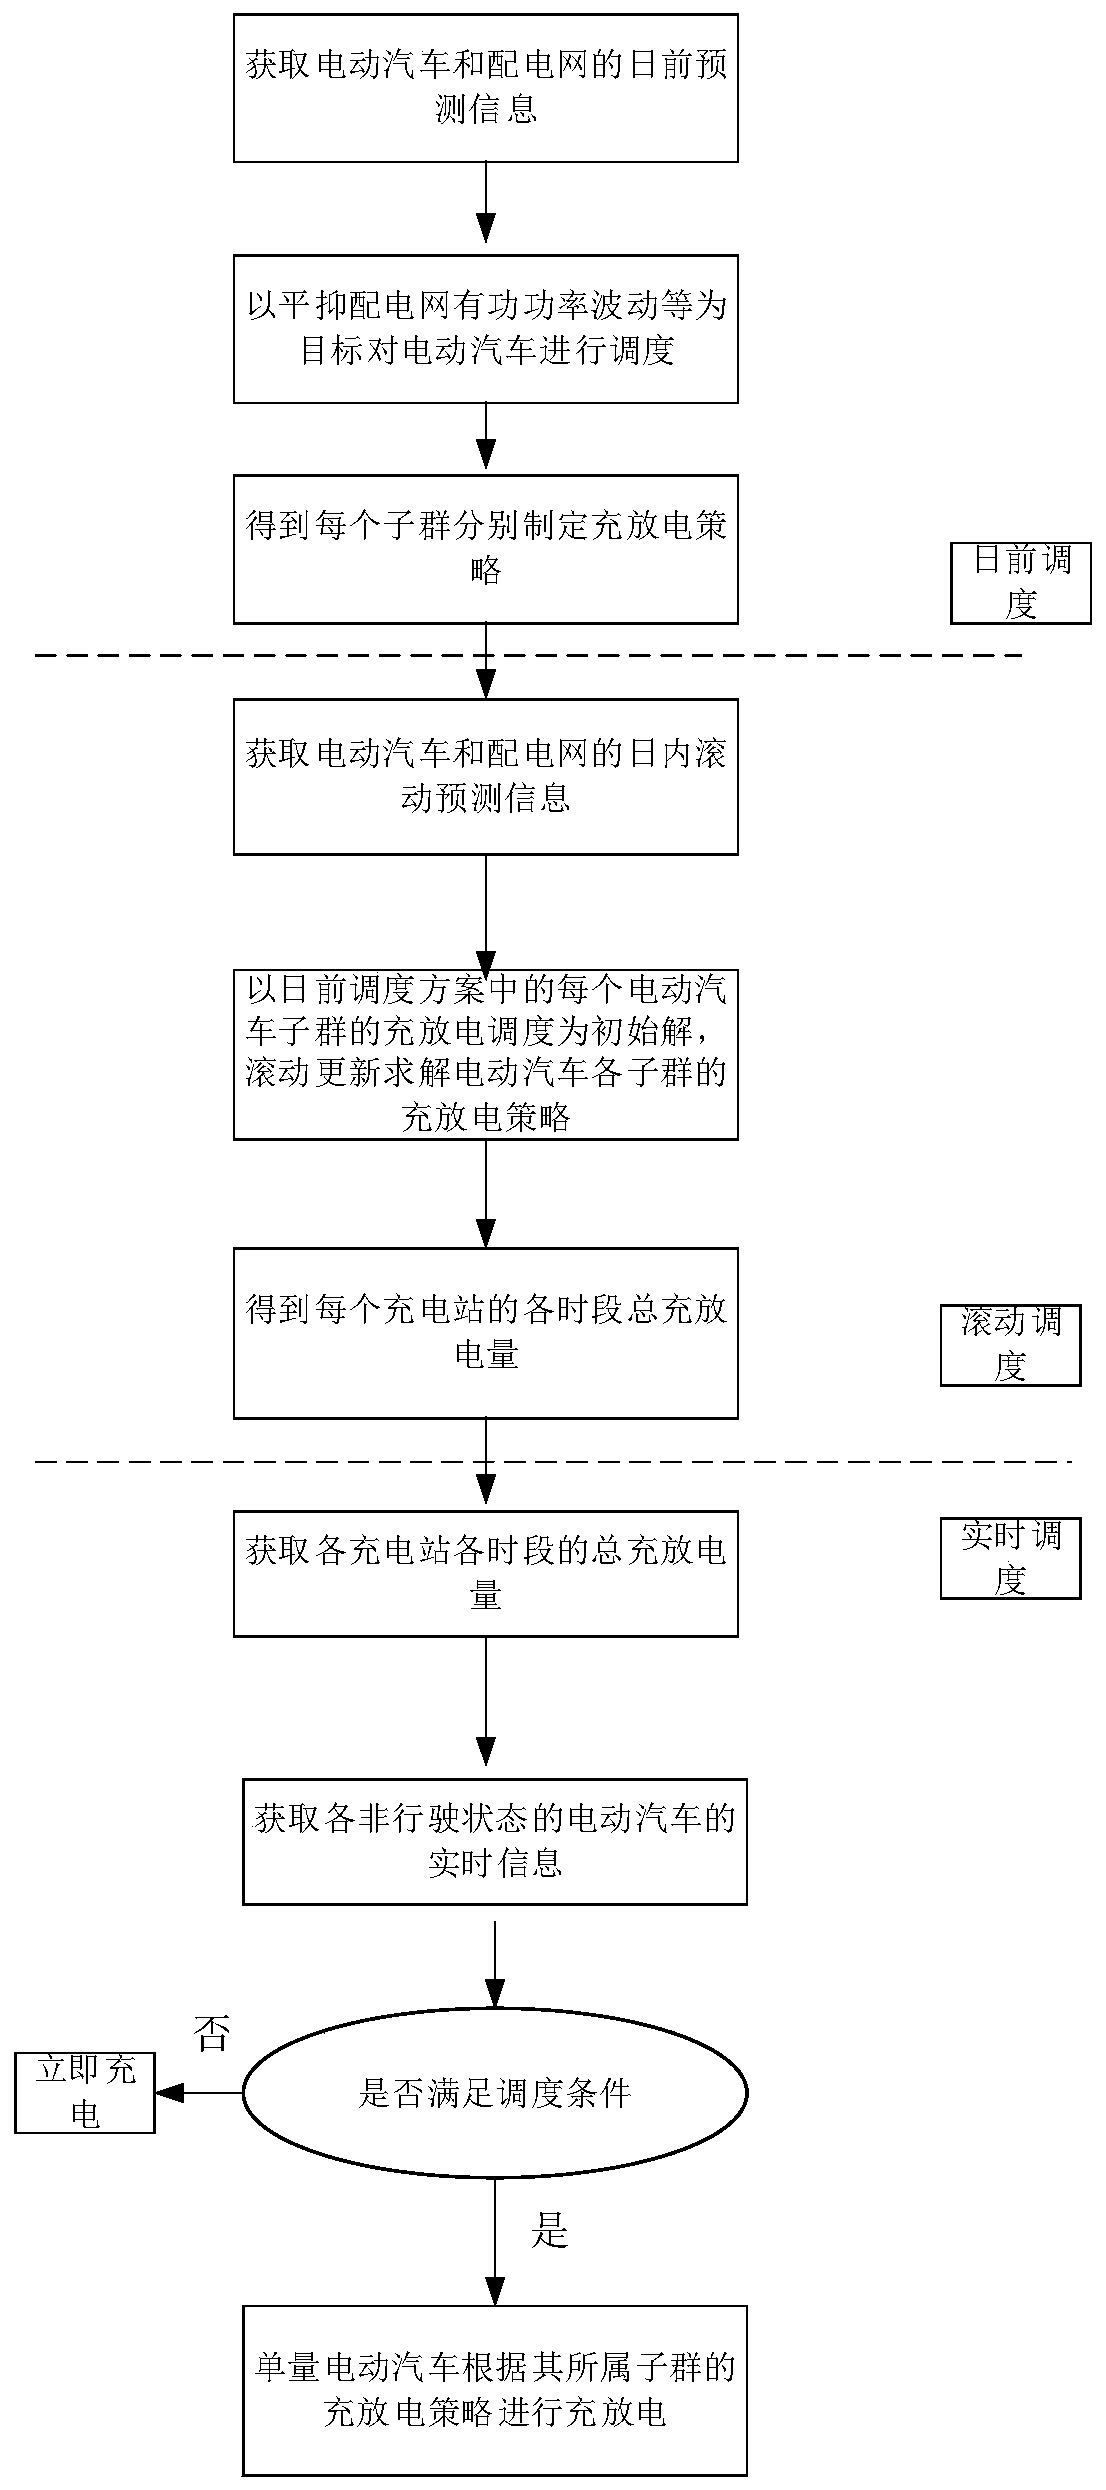 Power distribution network optimization scheduling method based on electric vehicle two-stage rolling strategy